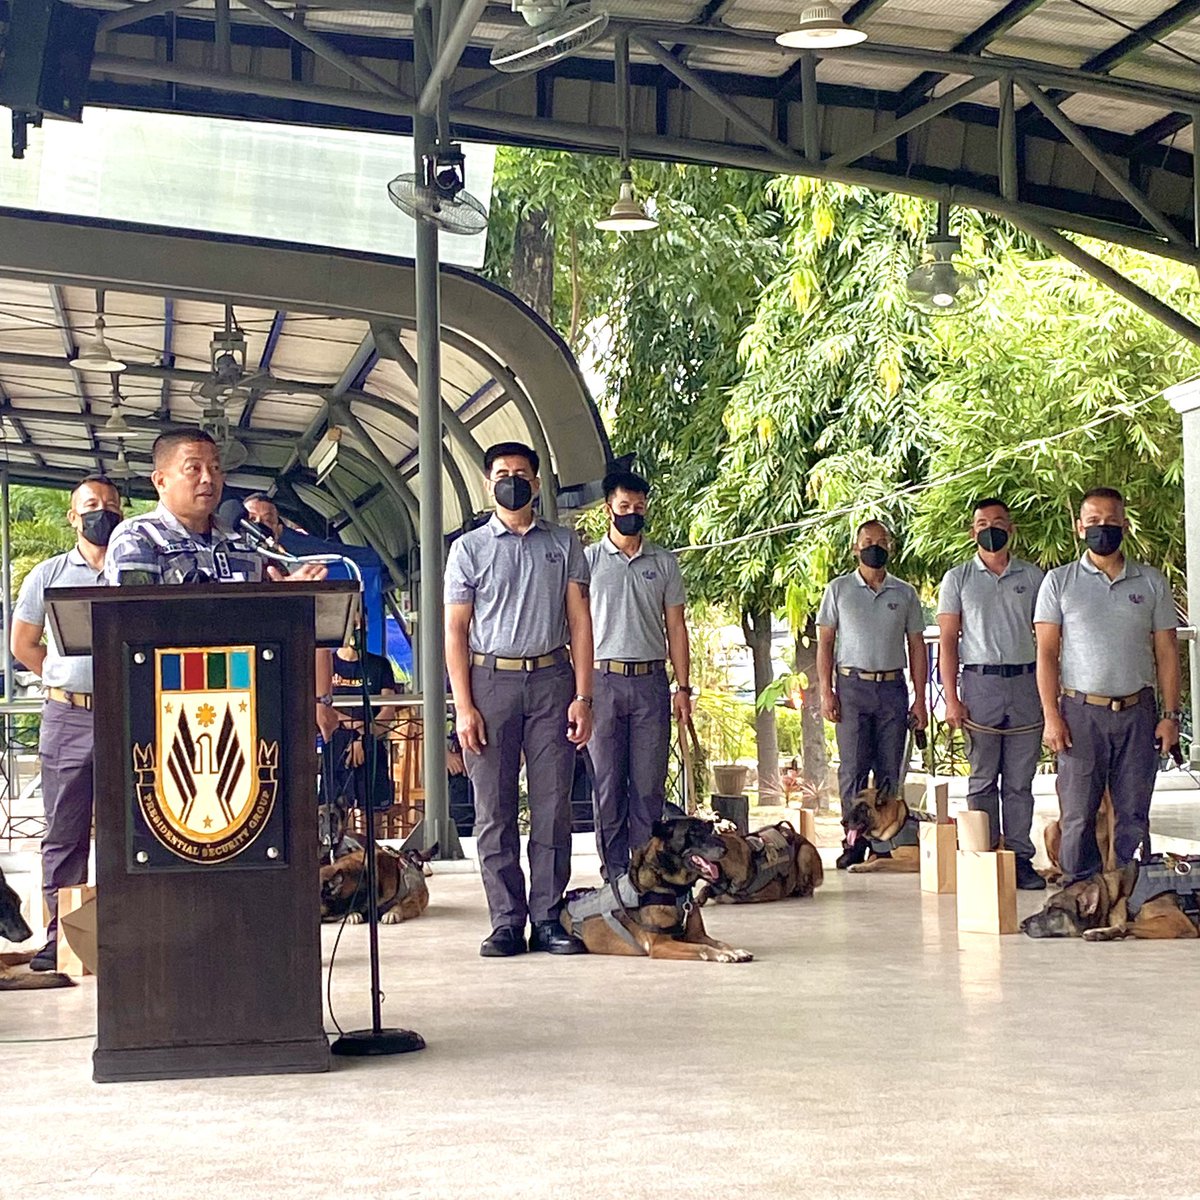 Congratulations and happy retirement to the Explosive Detector Dogs Betty, Brenda, Belick, Bosh, Carla, Cedric, Chito, and Coleen who served in the PSG for 8 years! 

Thank you for your service and loyalty! Have a pawsome retirement! #MilitaryWorkingDogs ♥️🦮🐾